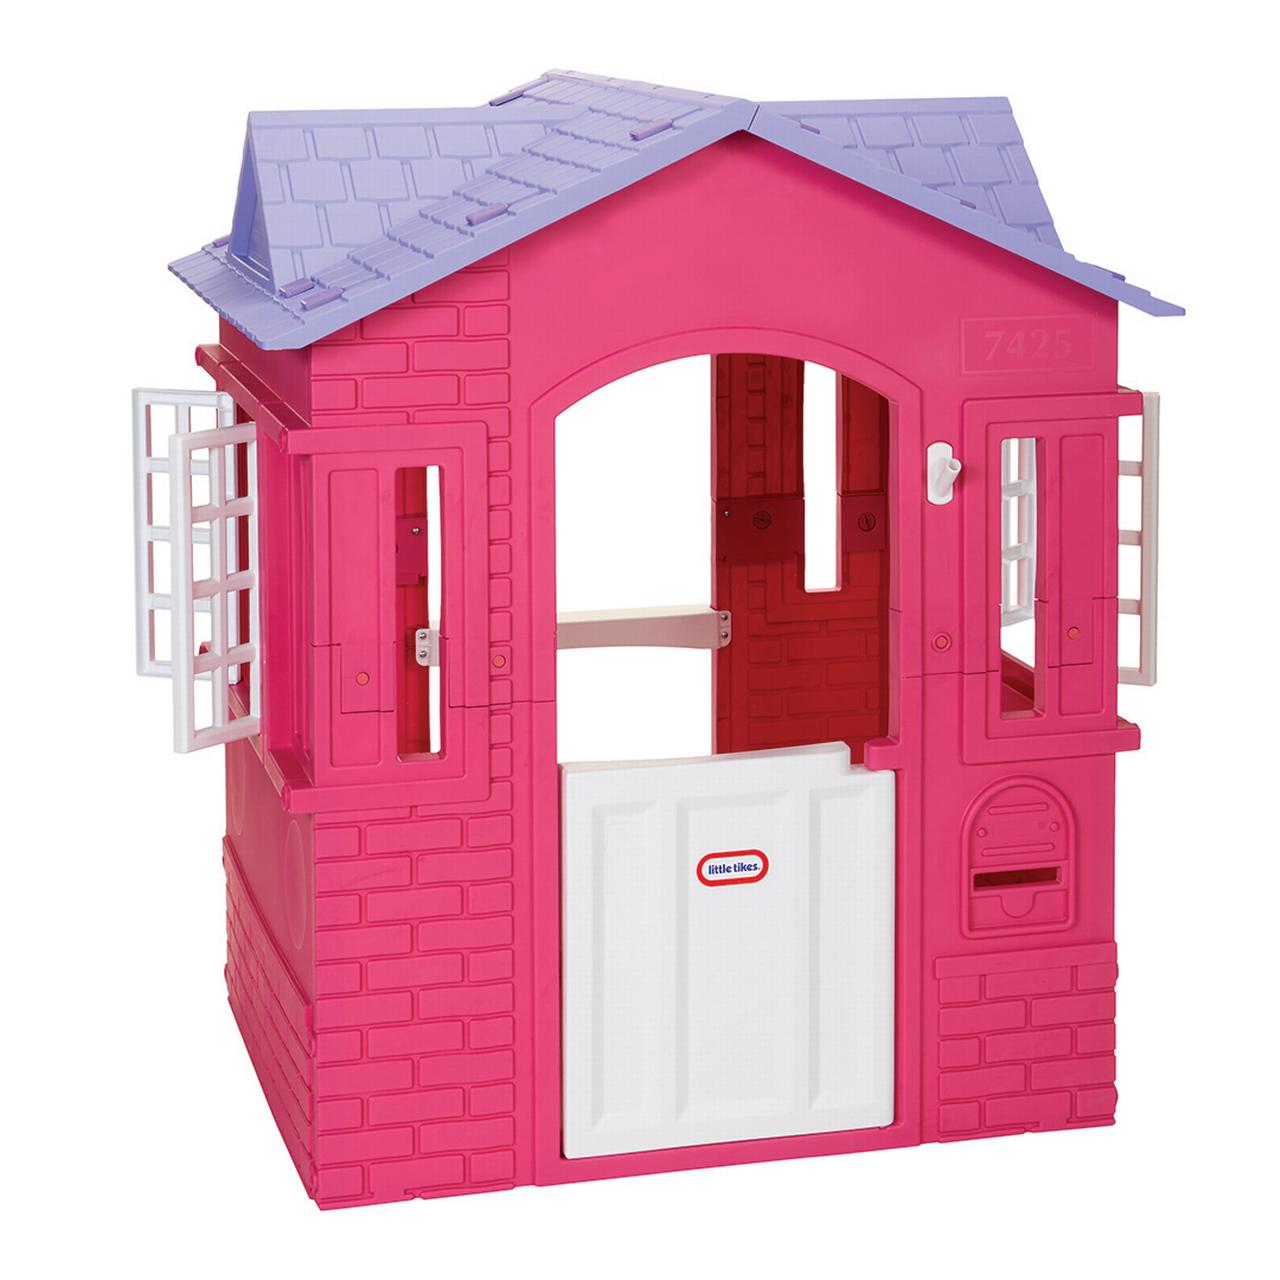 Little Tikes Cape Cottage House, Pink - Pretend Playhouse for Girls Boys Kids 2-8 Years Old - image 1 of 8